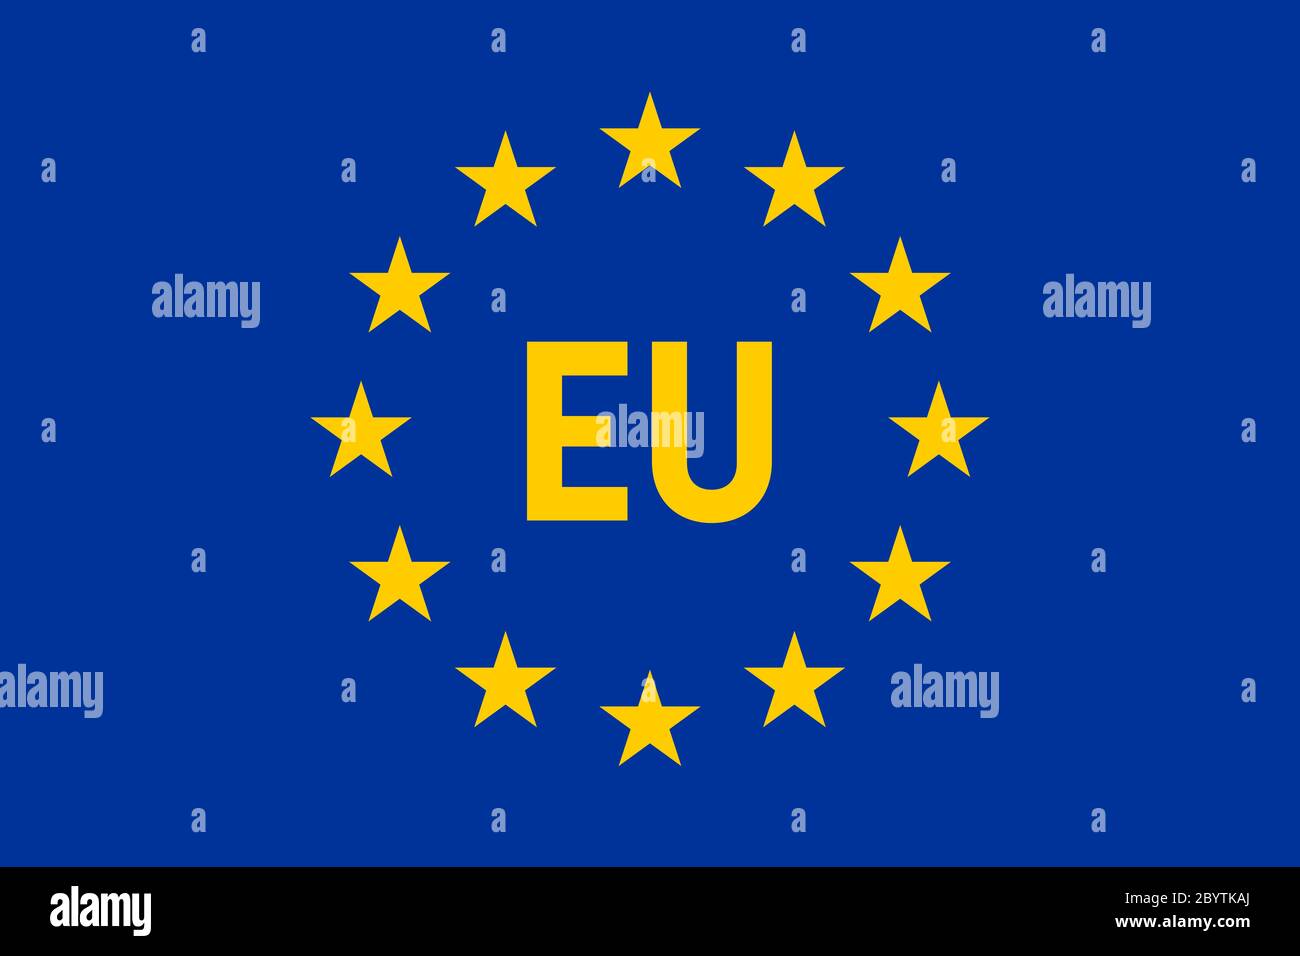 Flag of European Union. Twelve yellow stars on blue background with EU label in the middle. Vector illustration. Stock Vector